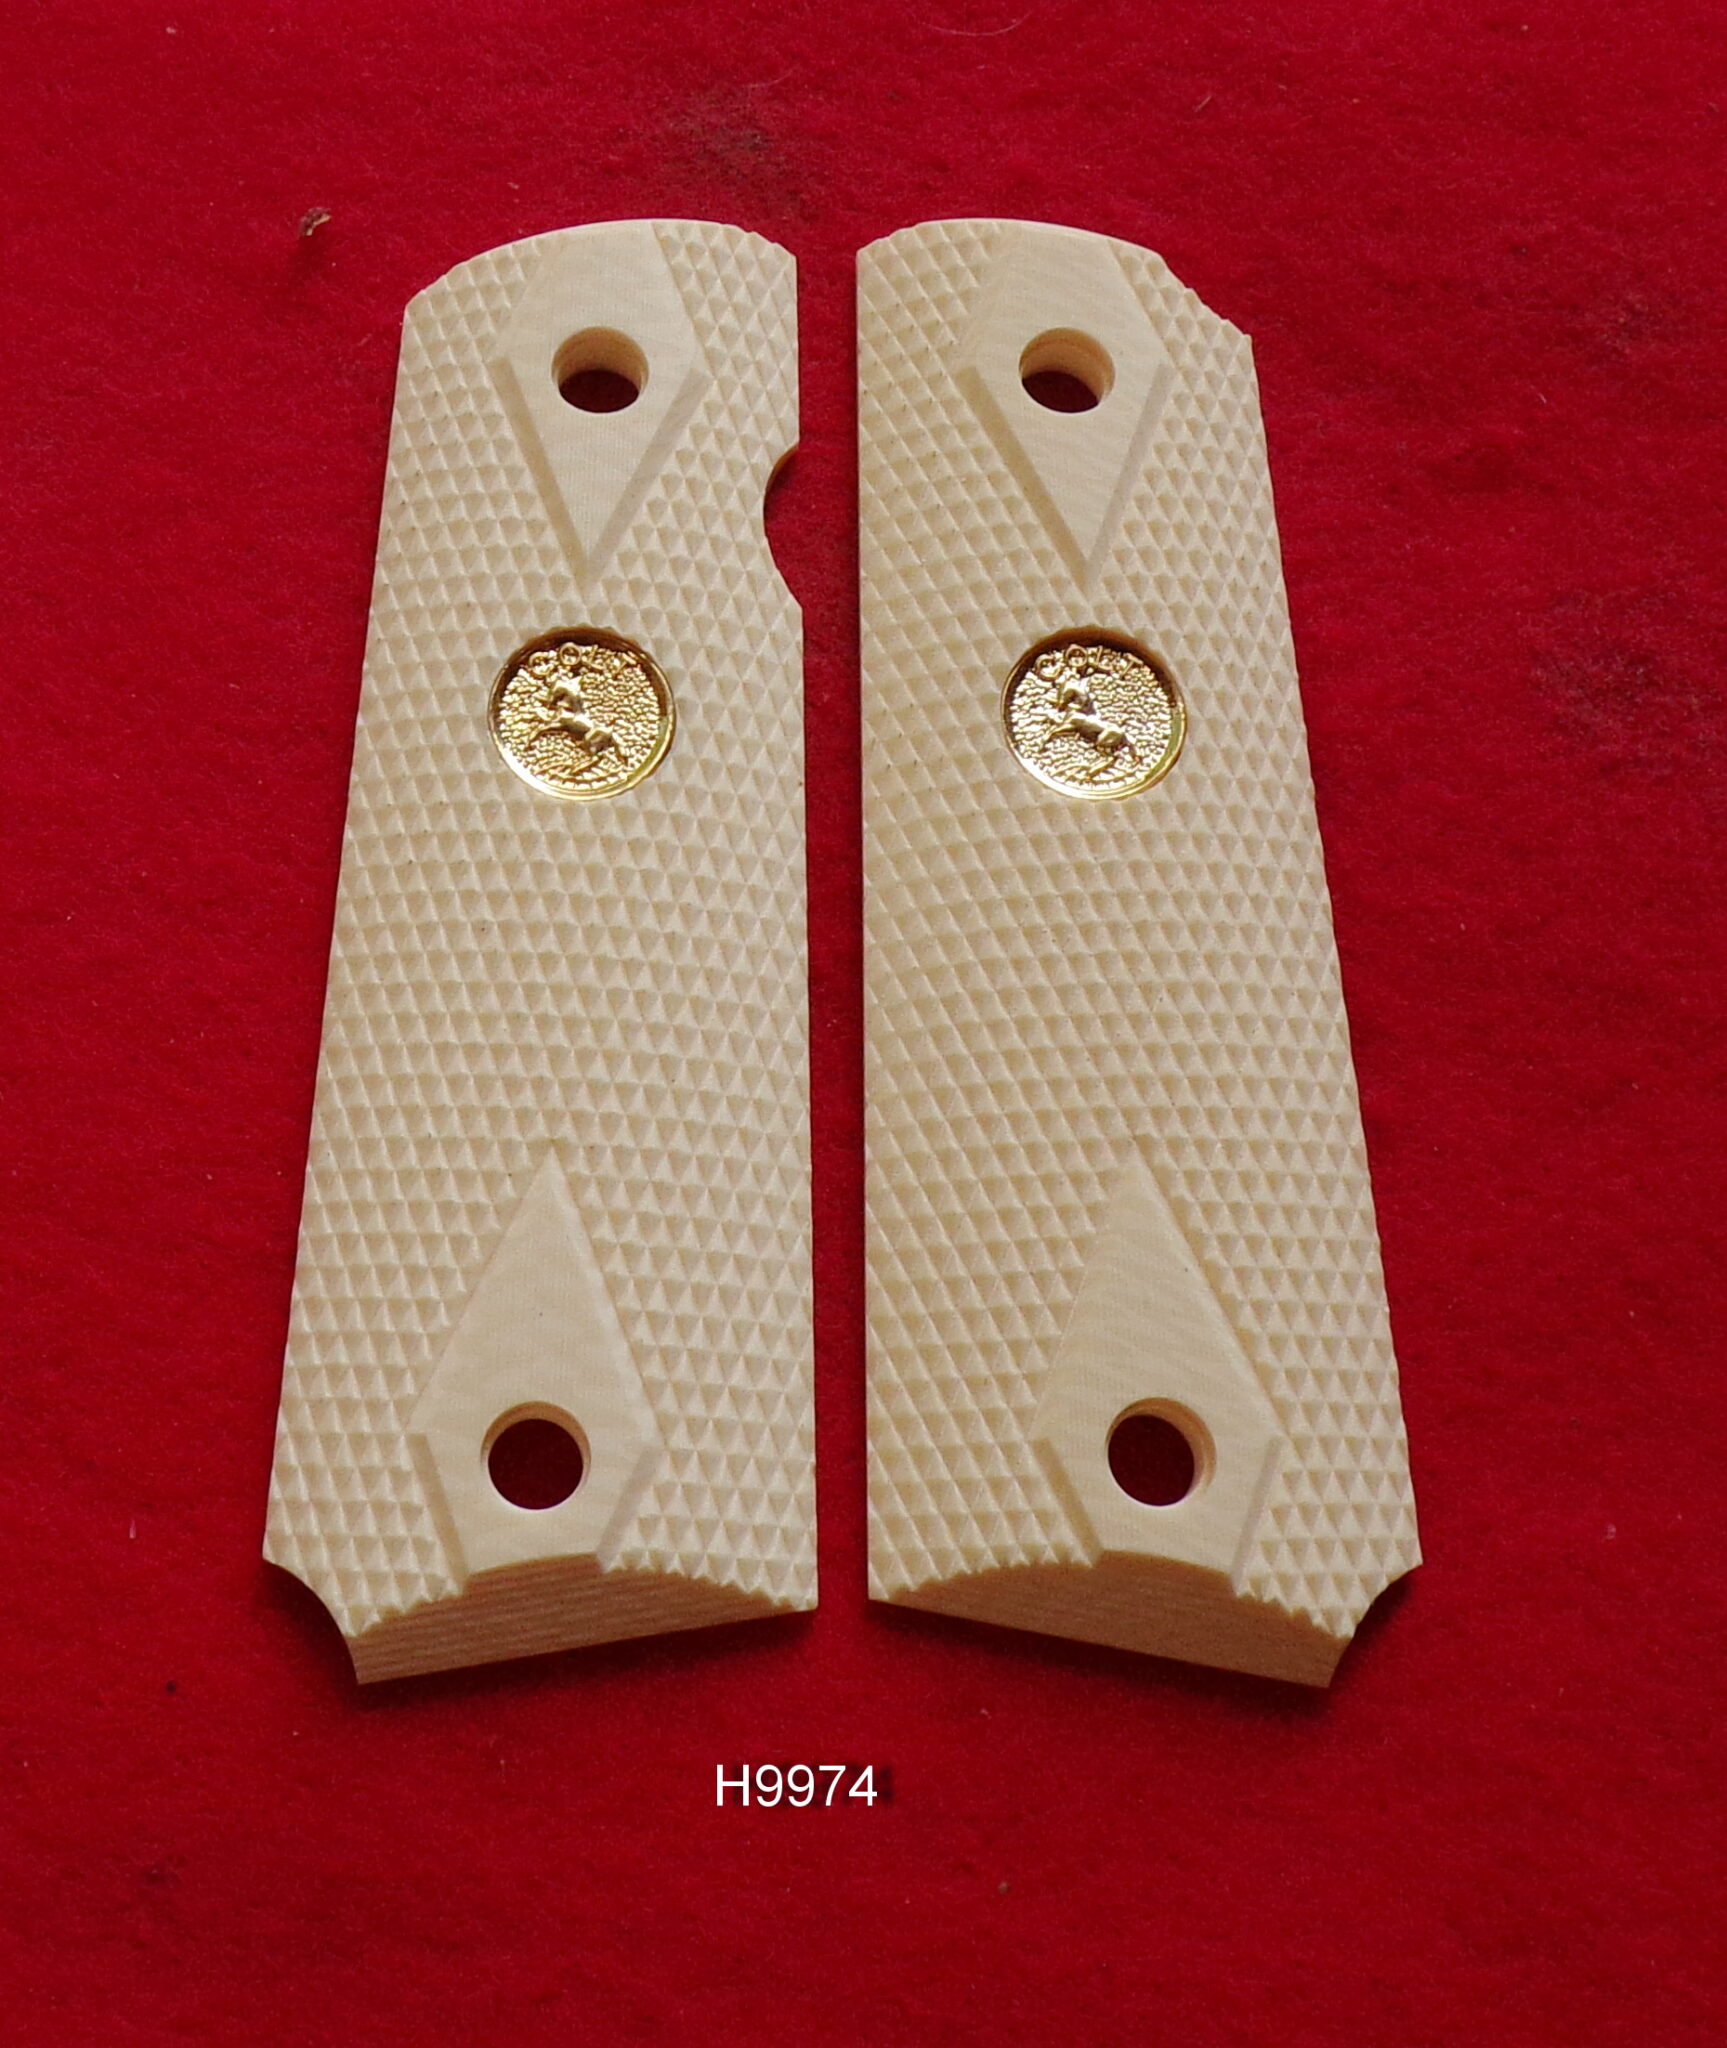 Checkered Imitation Ivory Grips Wgold Colt Medallions For Colt 1911 Government Models 7466